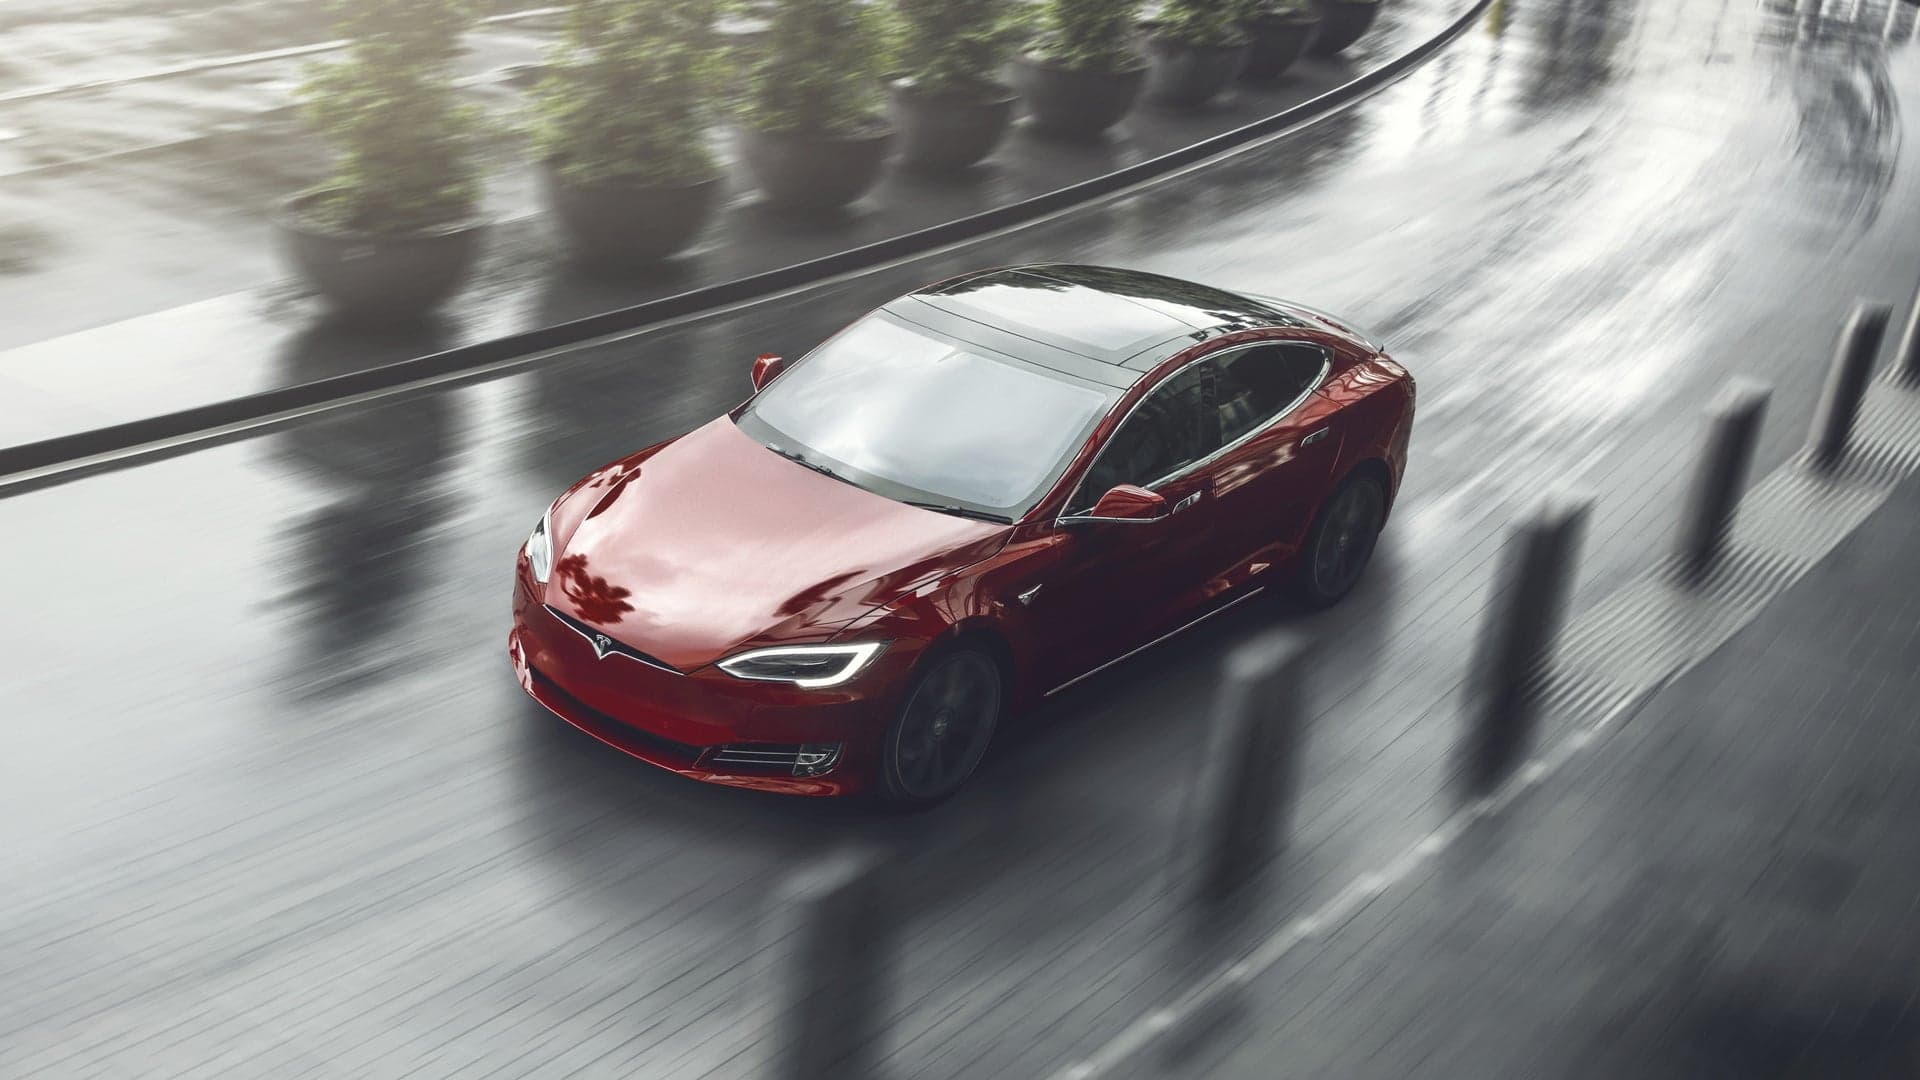 Woman Steals Tesla, Promptly Runs Out of Range and Gets Arrested